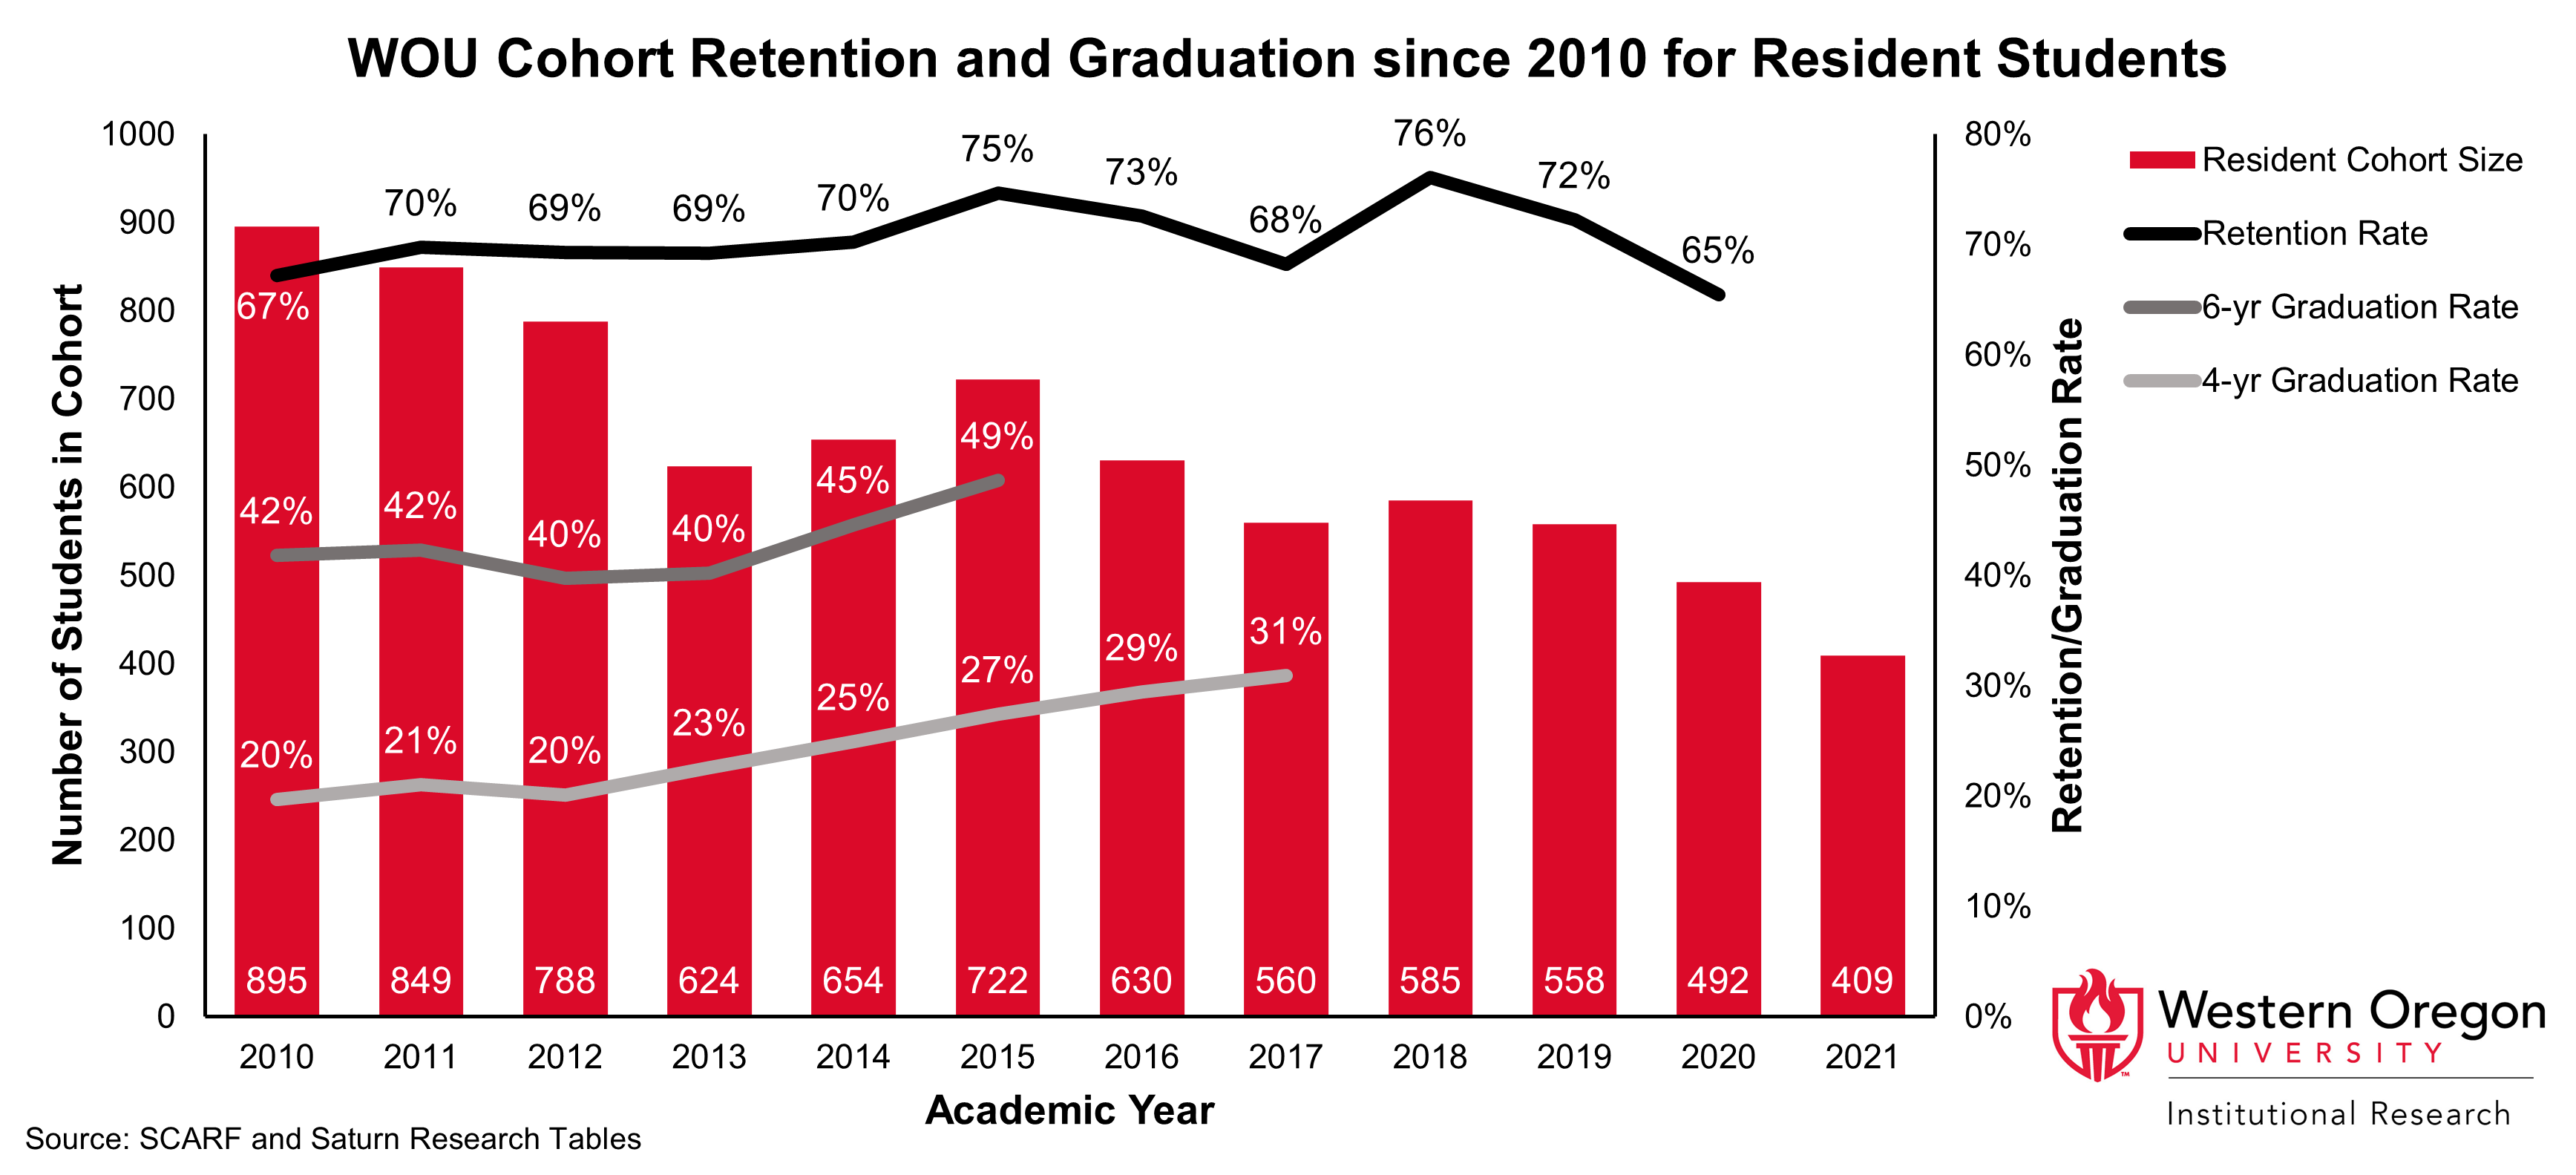 Bar and line graph of retention and 4- and 6-year graduation rates since 2010 for WOU students that have residency status, showing that graduation rates have been steadily increasing while retention rates have remained largely stable